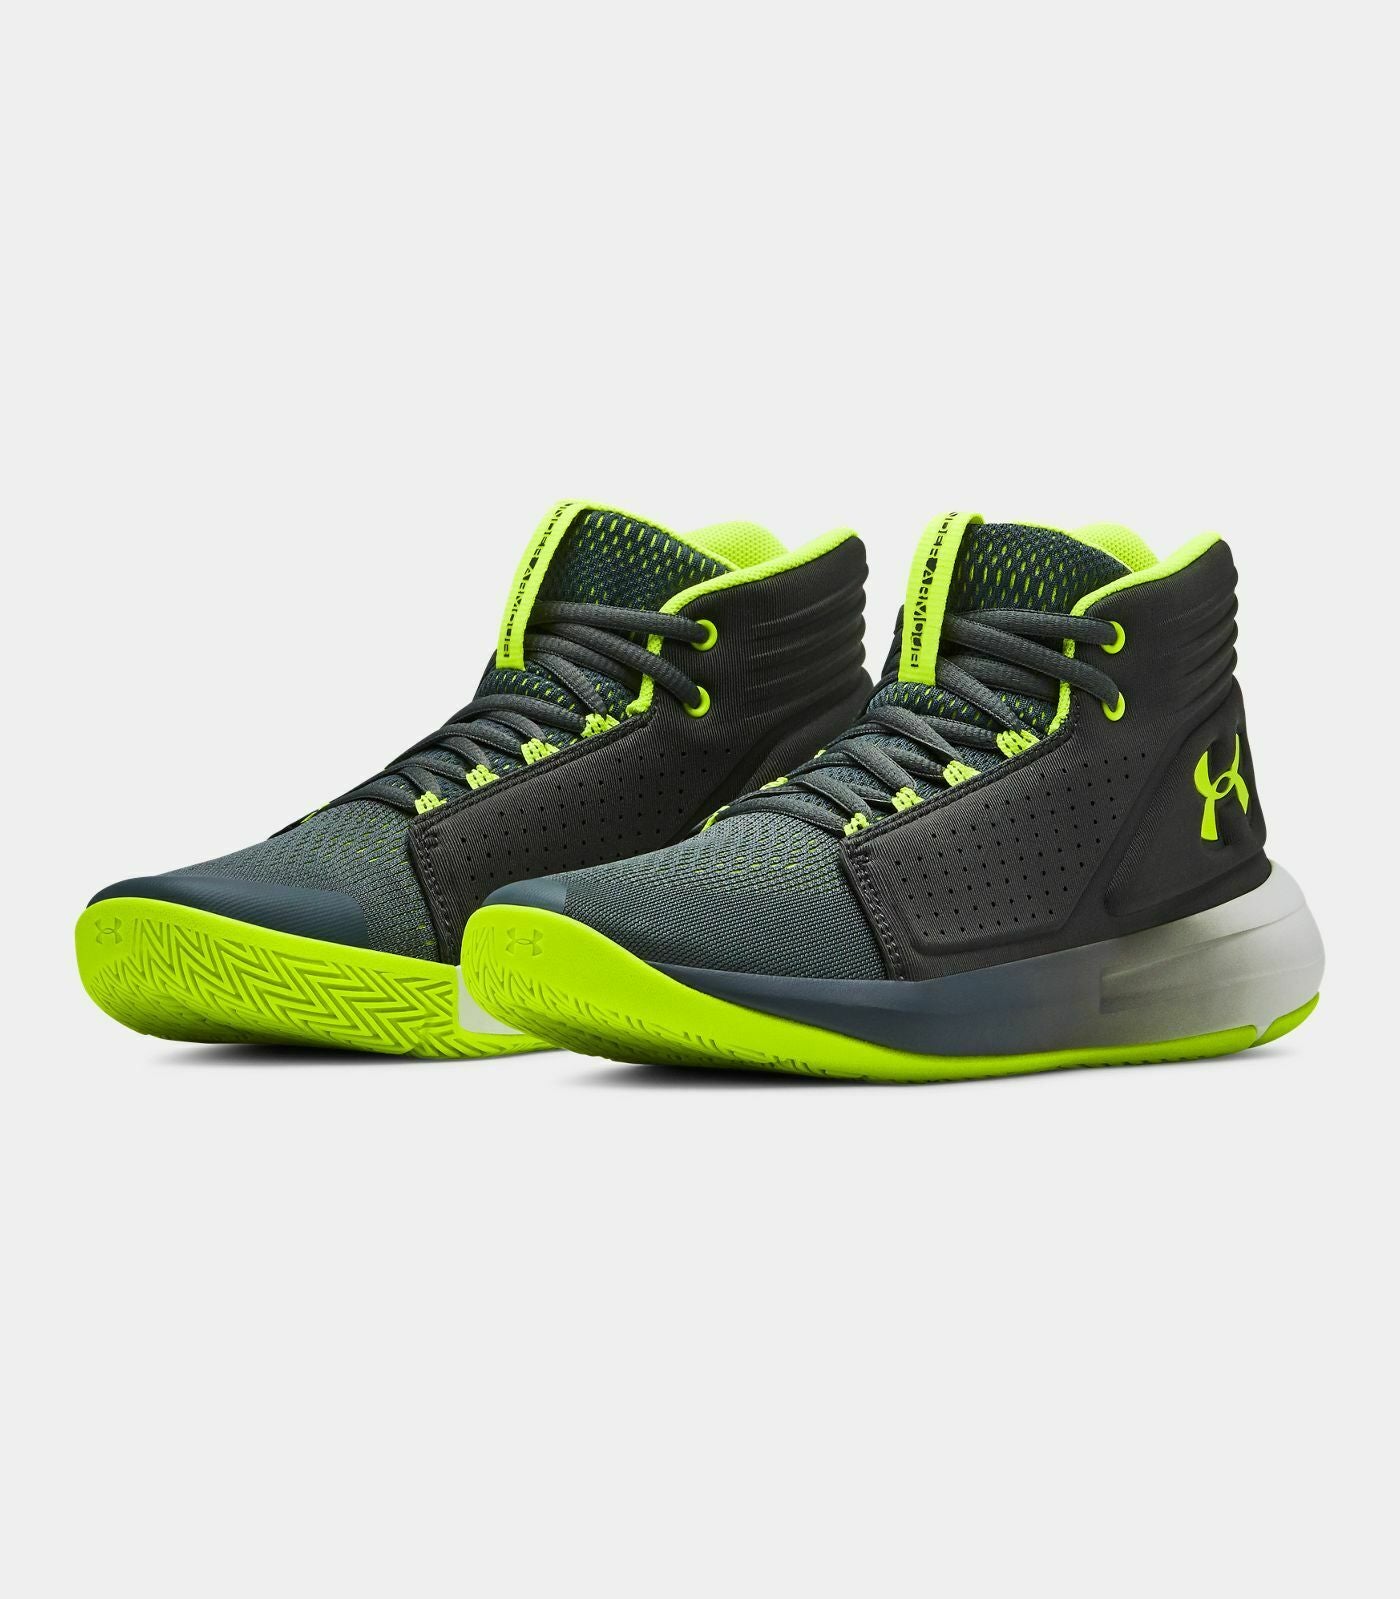 Under Armour Youth Bball GS Torch Mid - (3020428 103) - UAM - R2L12